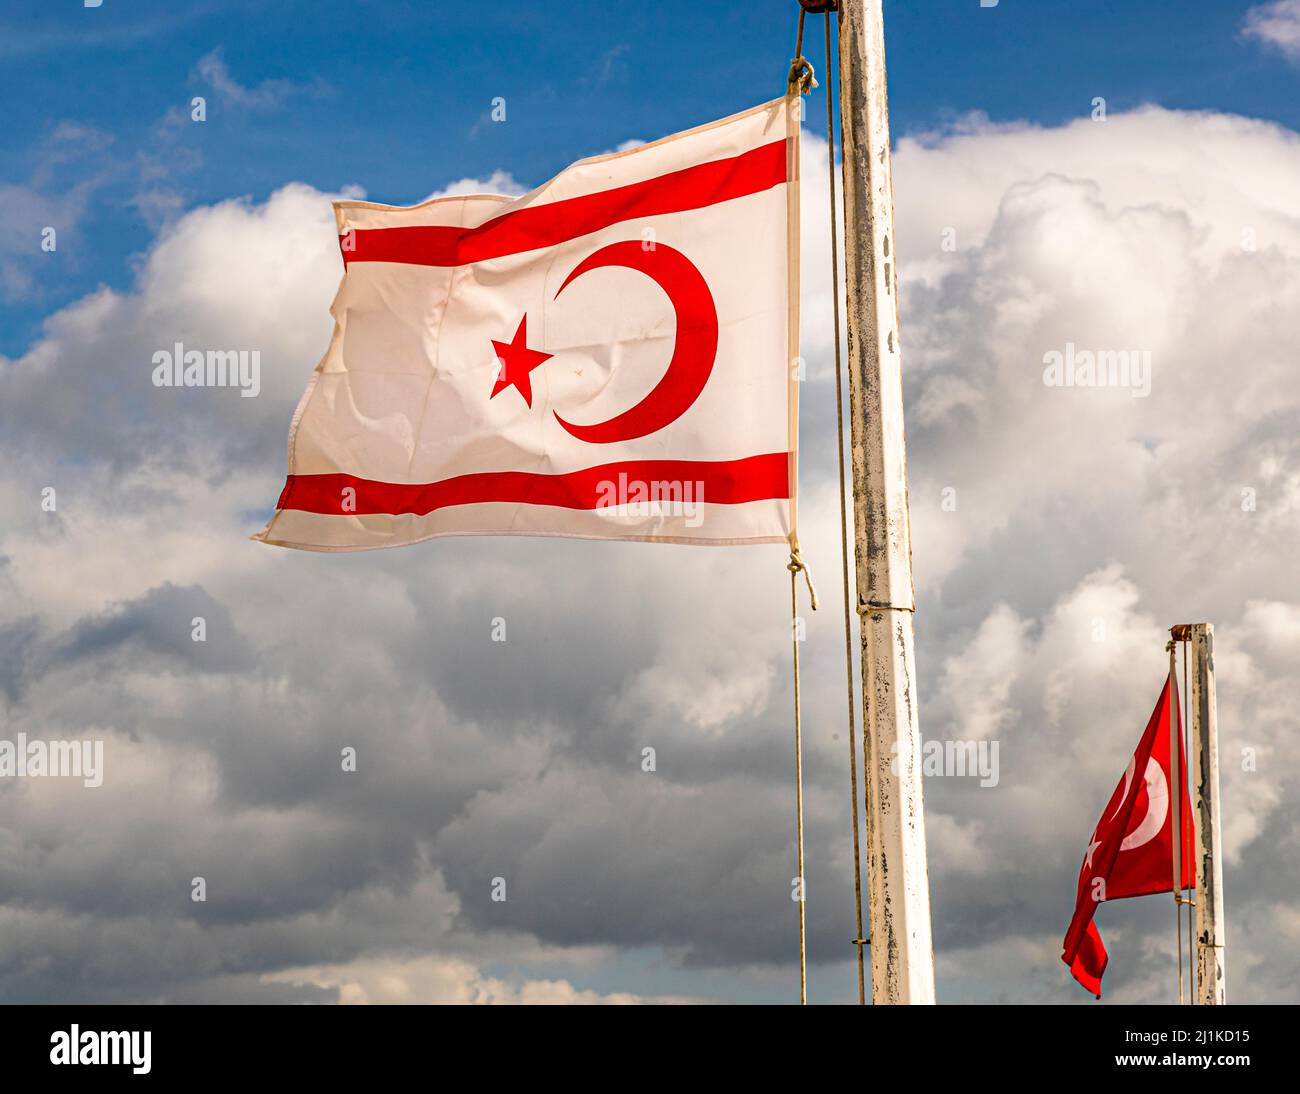 In the northern Cypriot town of Dipkarpaz (Turkish Republic of Northern Cyprus (TRNC)), the Greek-speaking population lives in peaceful harmony with the Turkish-speaking population. Stock Photo